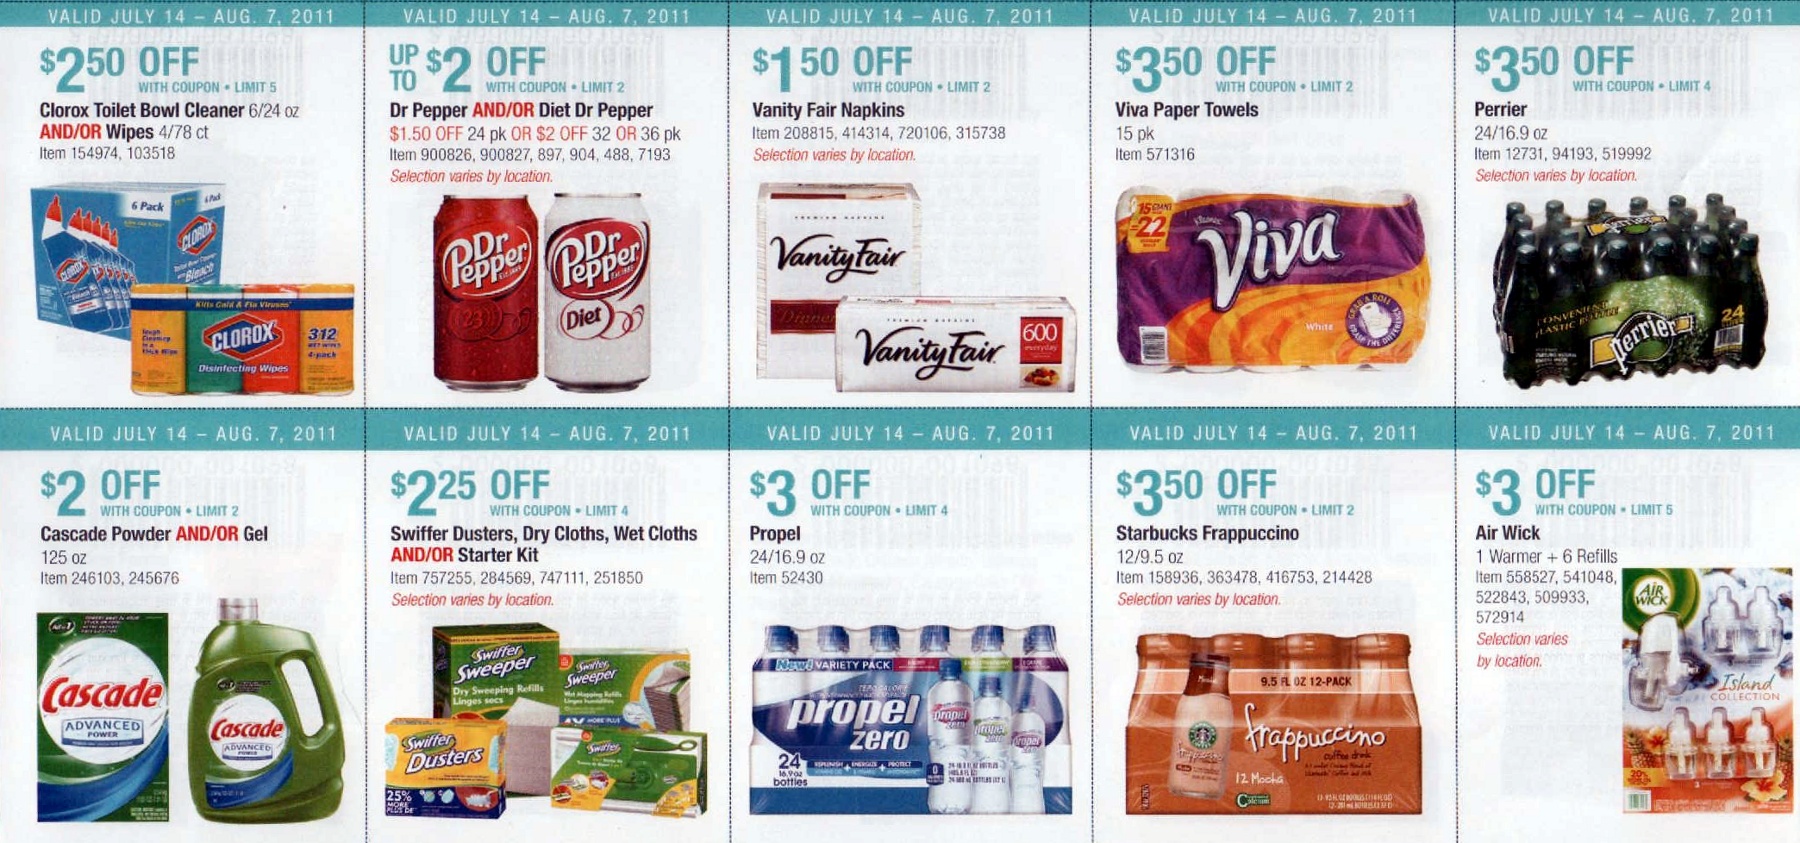 Coupon book full size page -> 3 <-